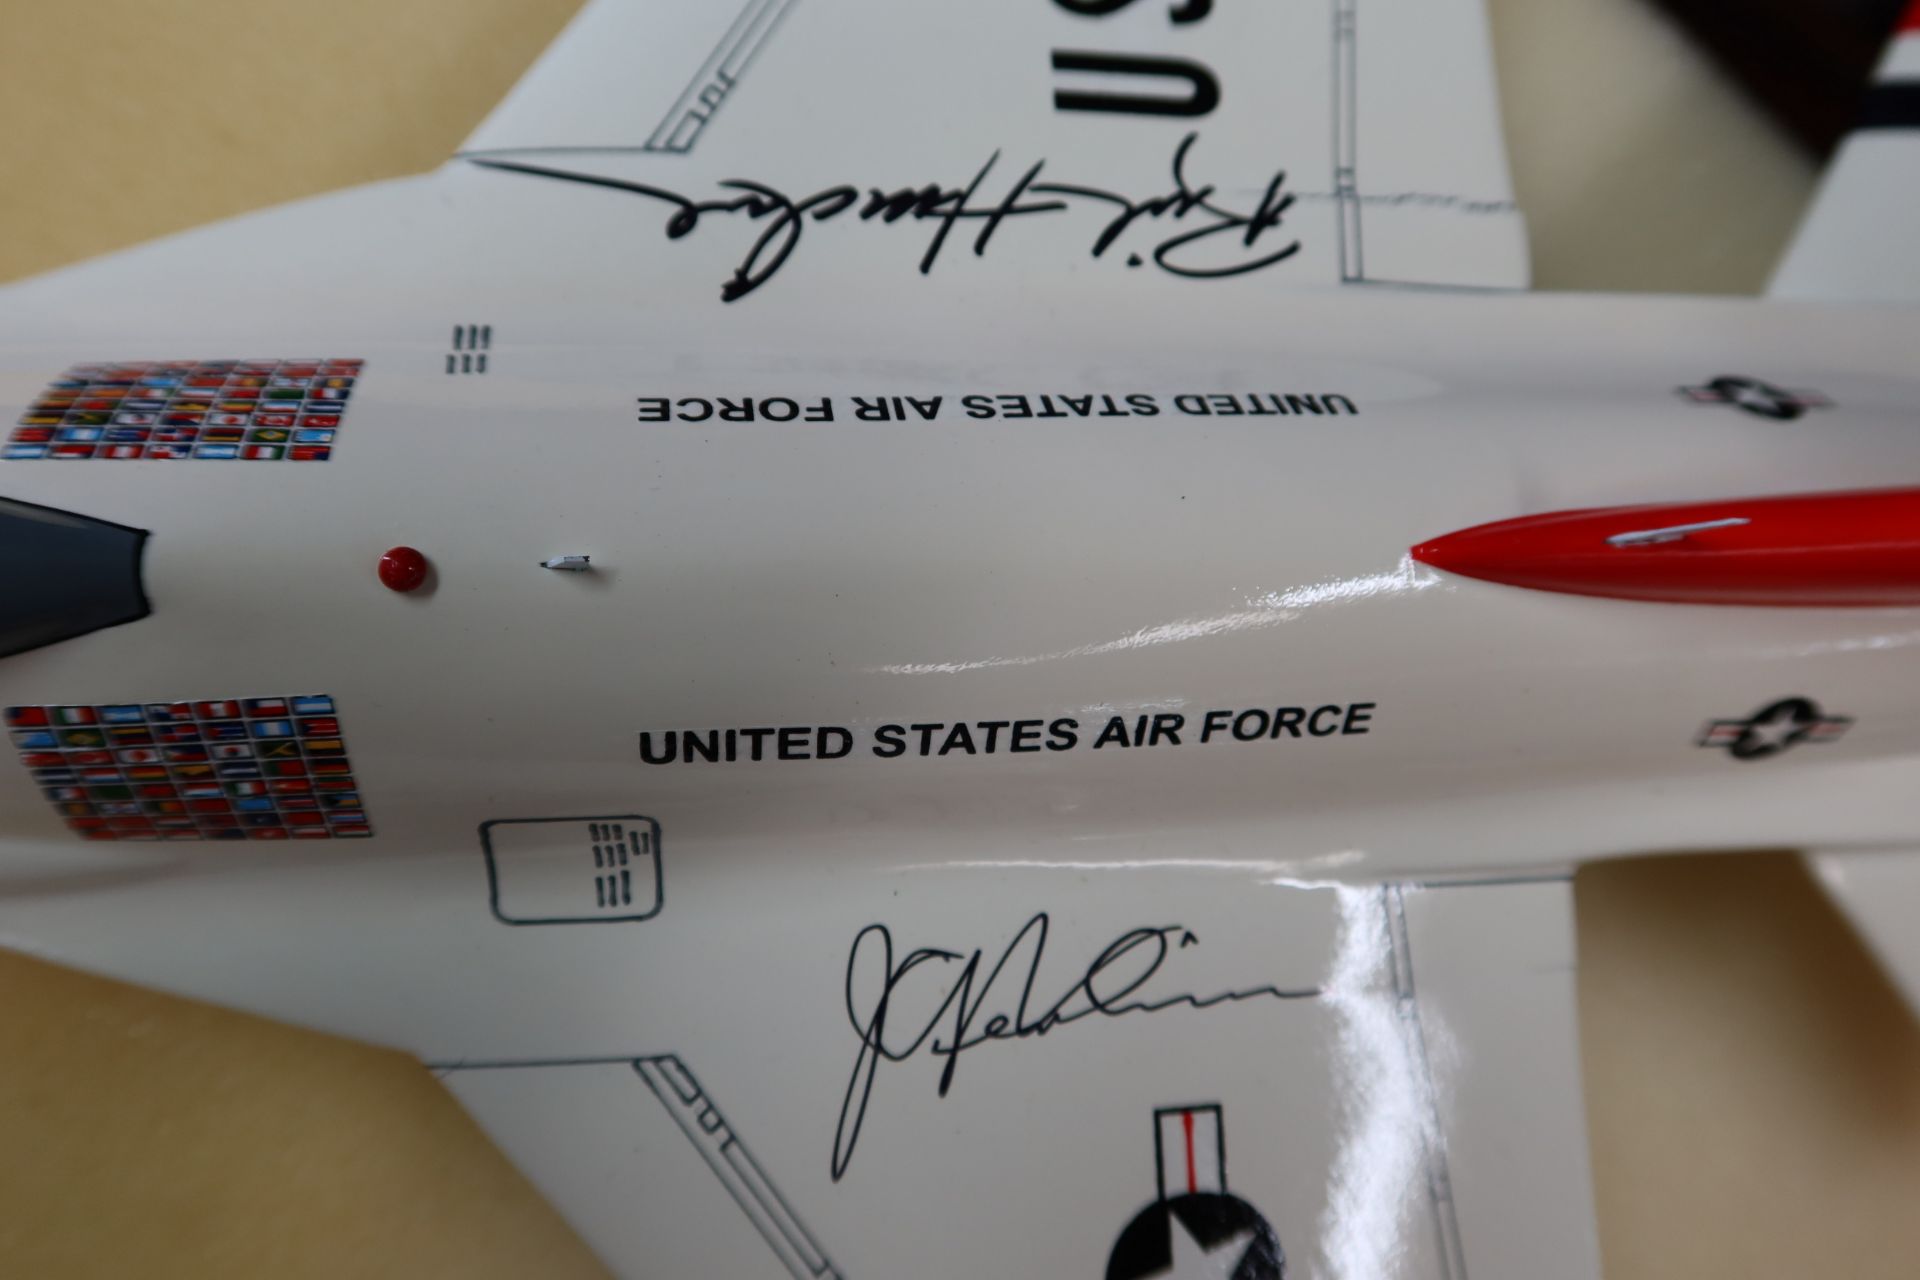 LOT COLLECTION THUNDERBIRD COLLECTABLES: 2 AUTOGRAPHED JETS, SIGNED W/# PICTURES & PATCHES - Image 6 of 12